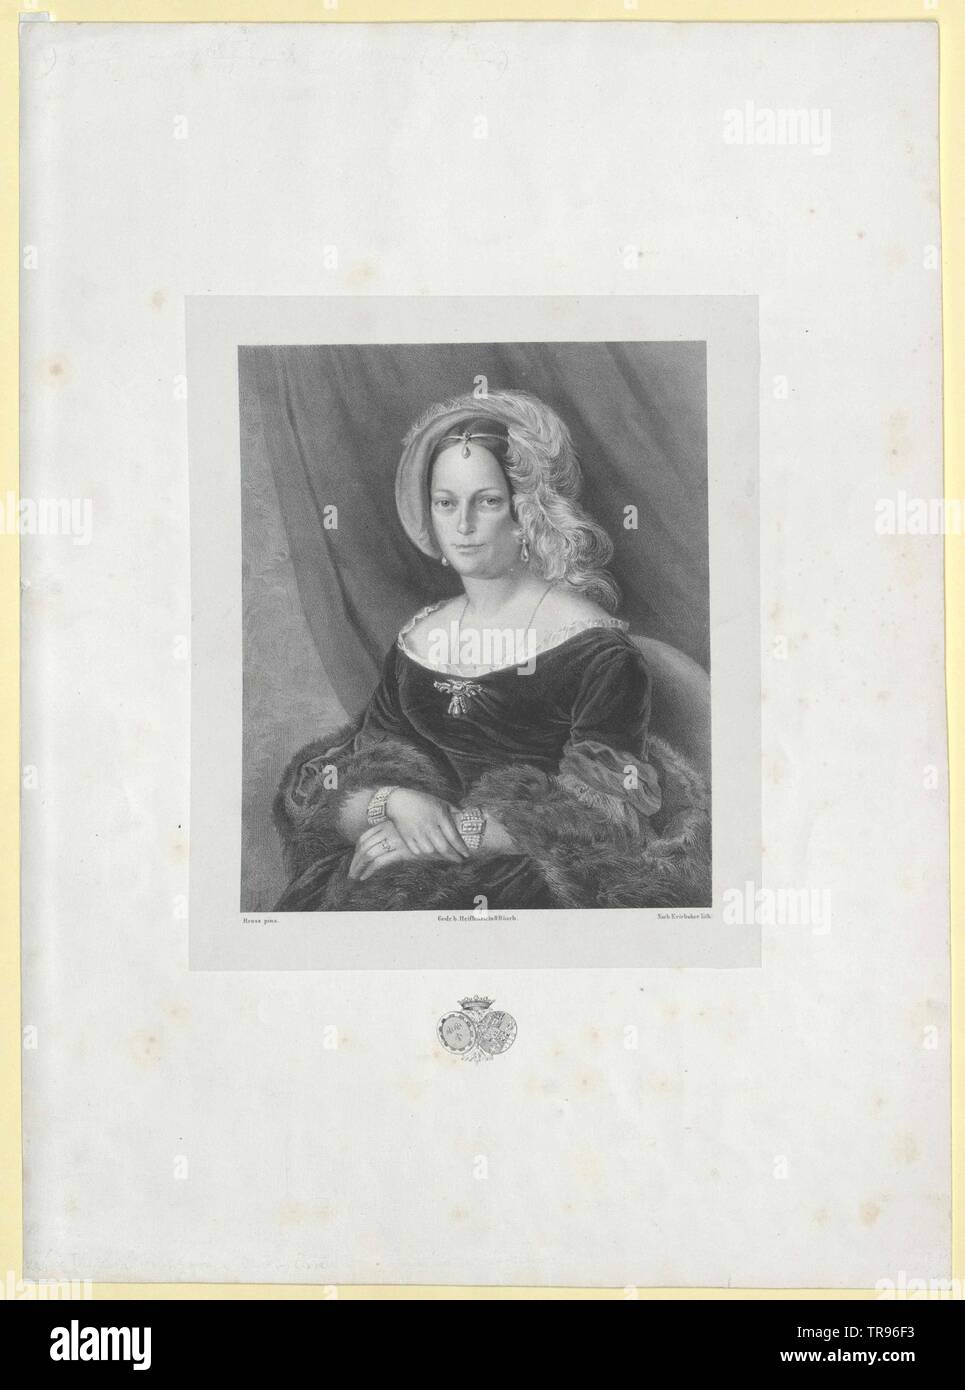 Caroline, Prinzessin von Sizilien, Additional-Rights - Clearance-Info - Not-Available Stockfoto